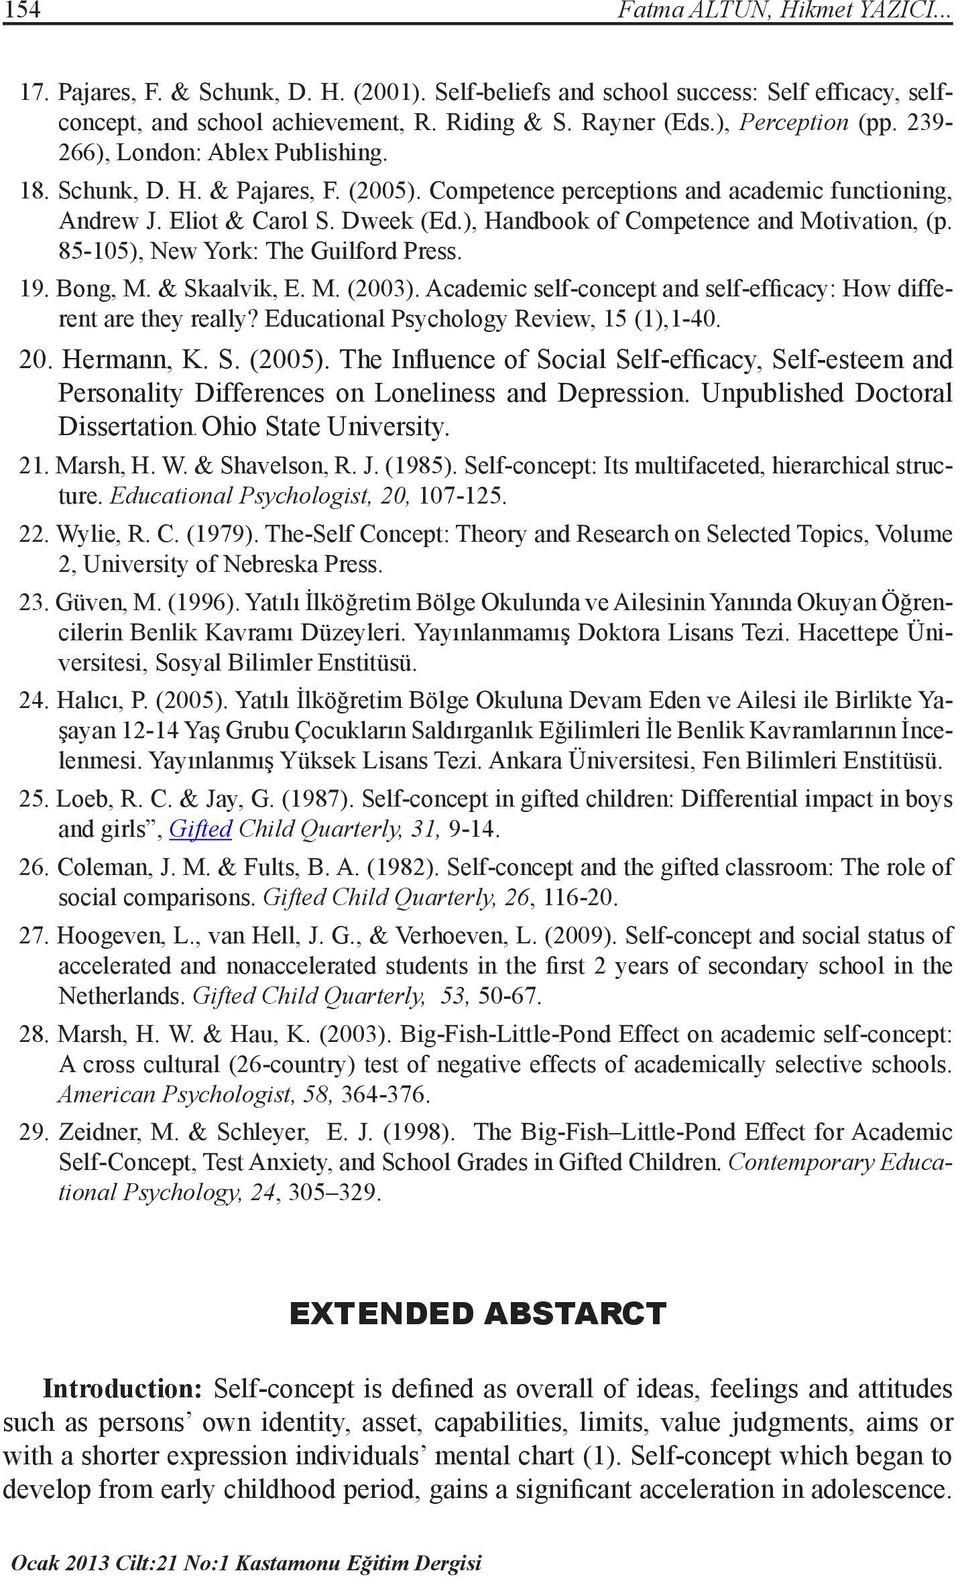 ), Handbook of Competence and Motivation, (p. 85-105), New York: The Guilford Press. 19. Bong, M. & Skaalvik, E. M. (2003). Academic self-concept and self-efficacy: How different are they really?